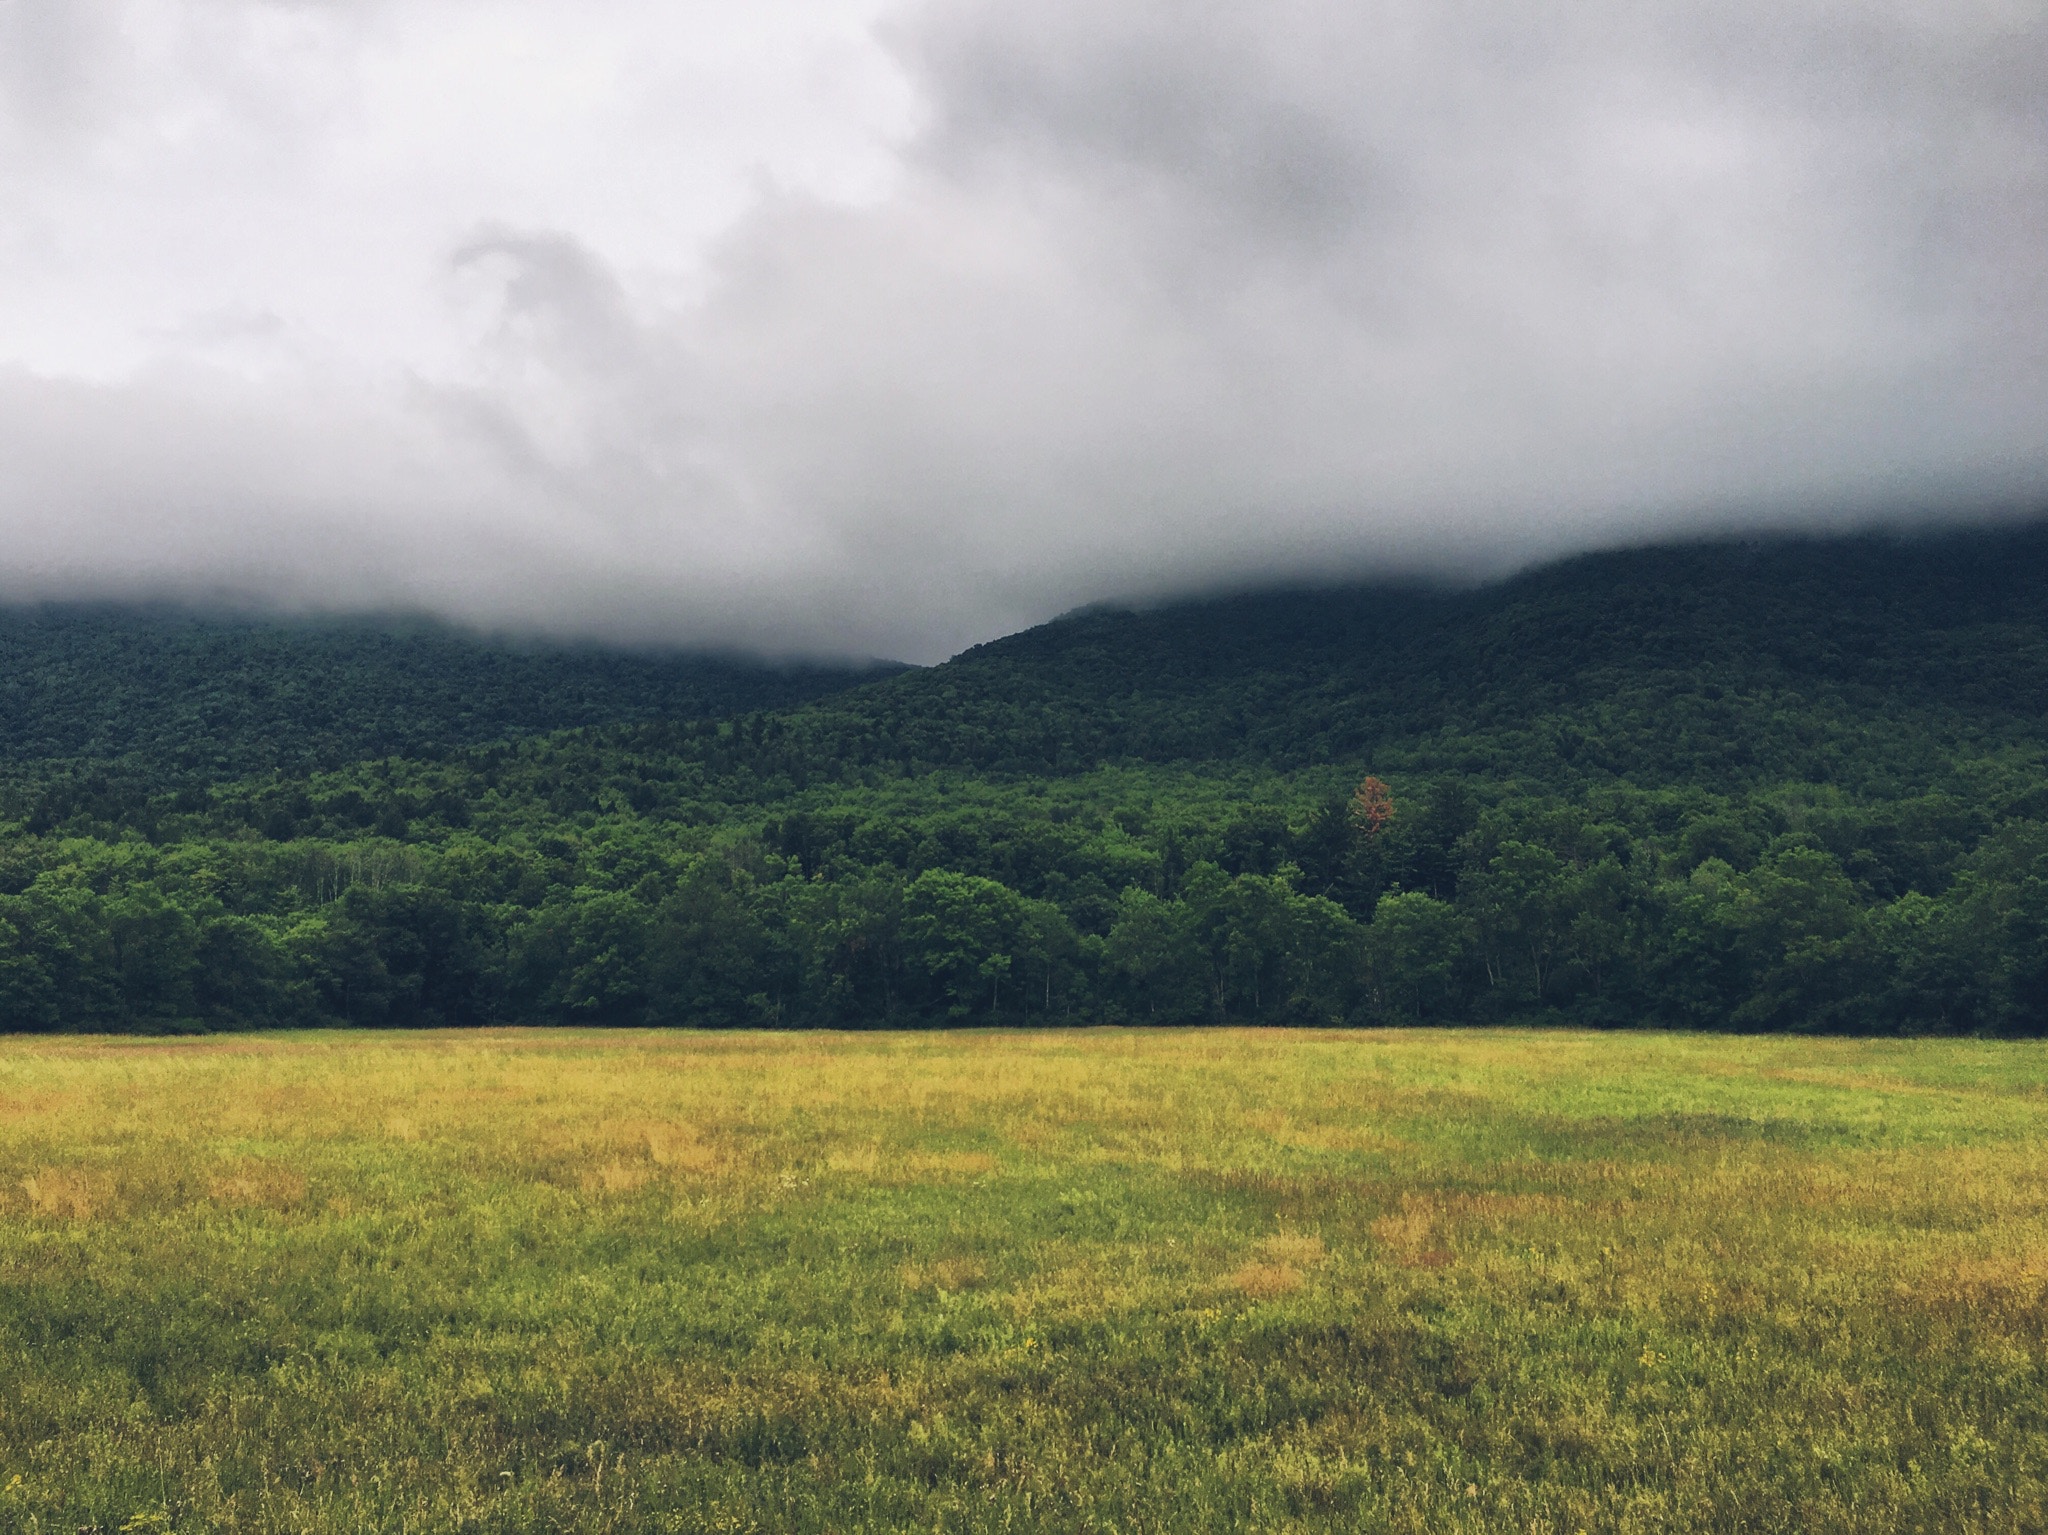 The Best Time To Travel To The Catskill Mountains